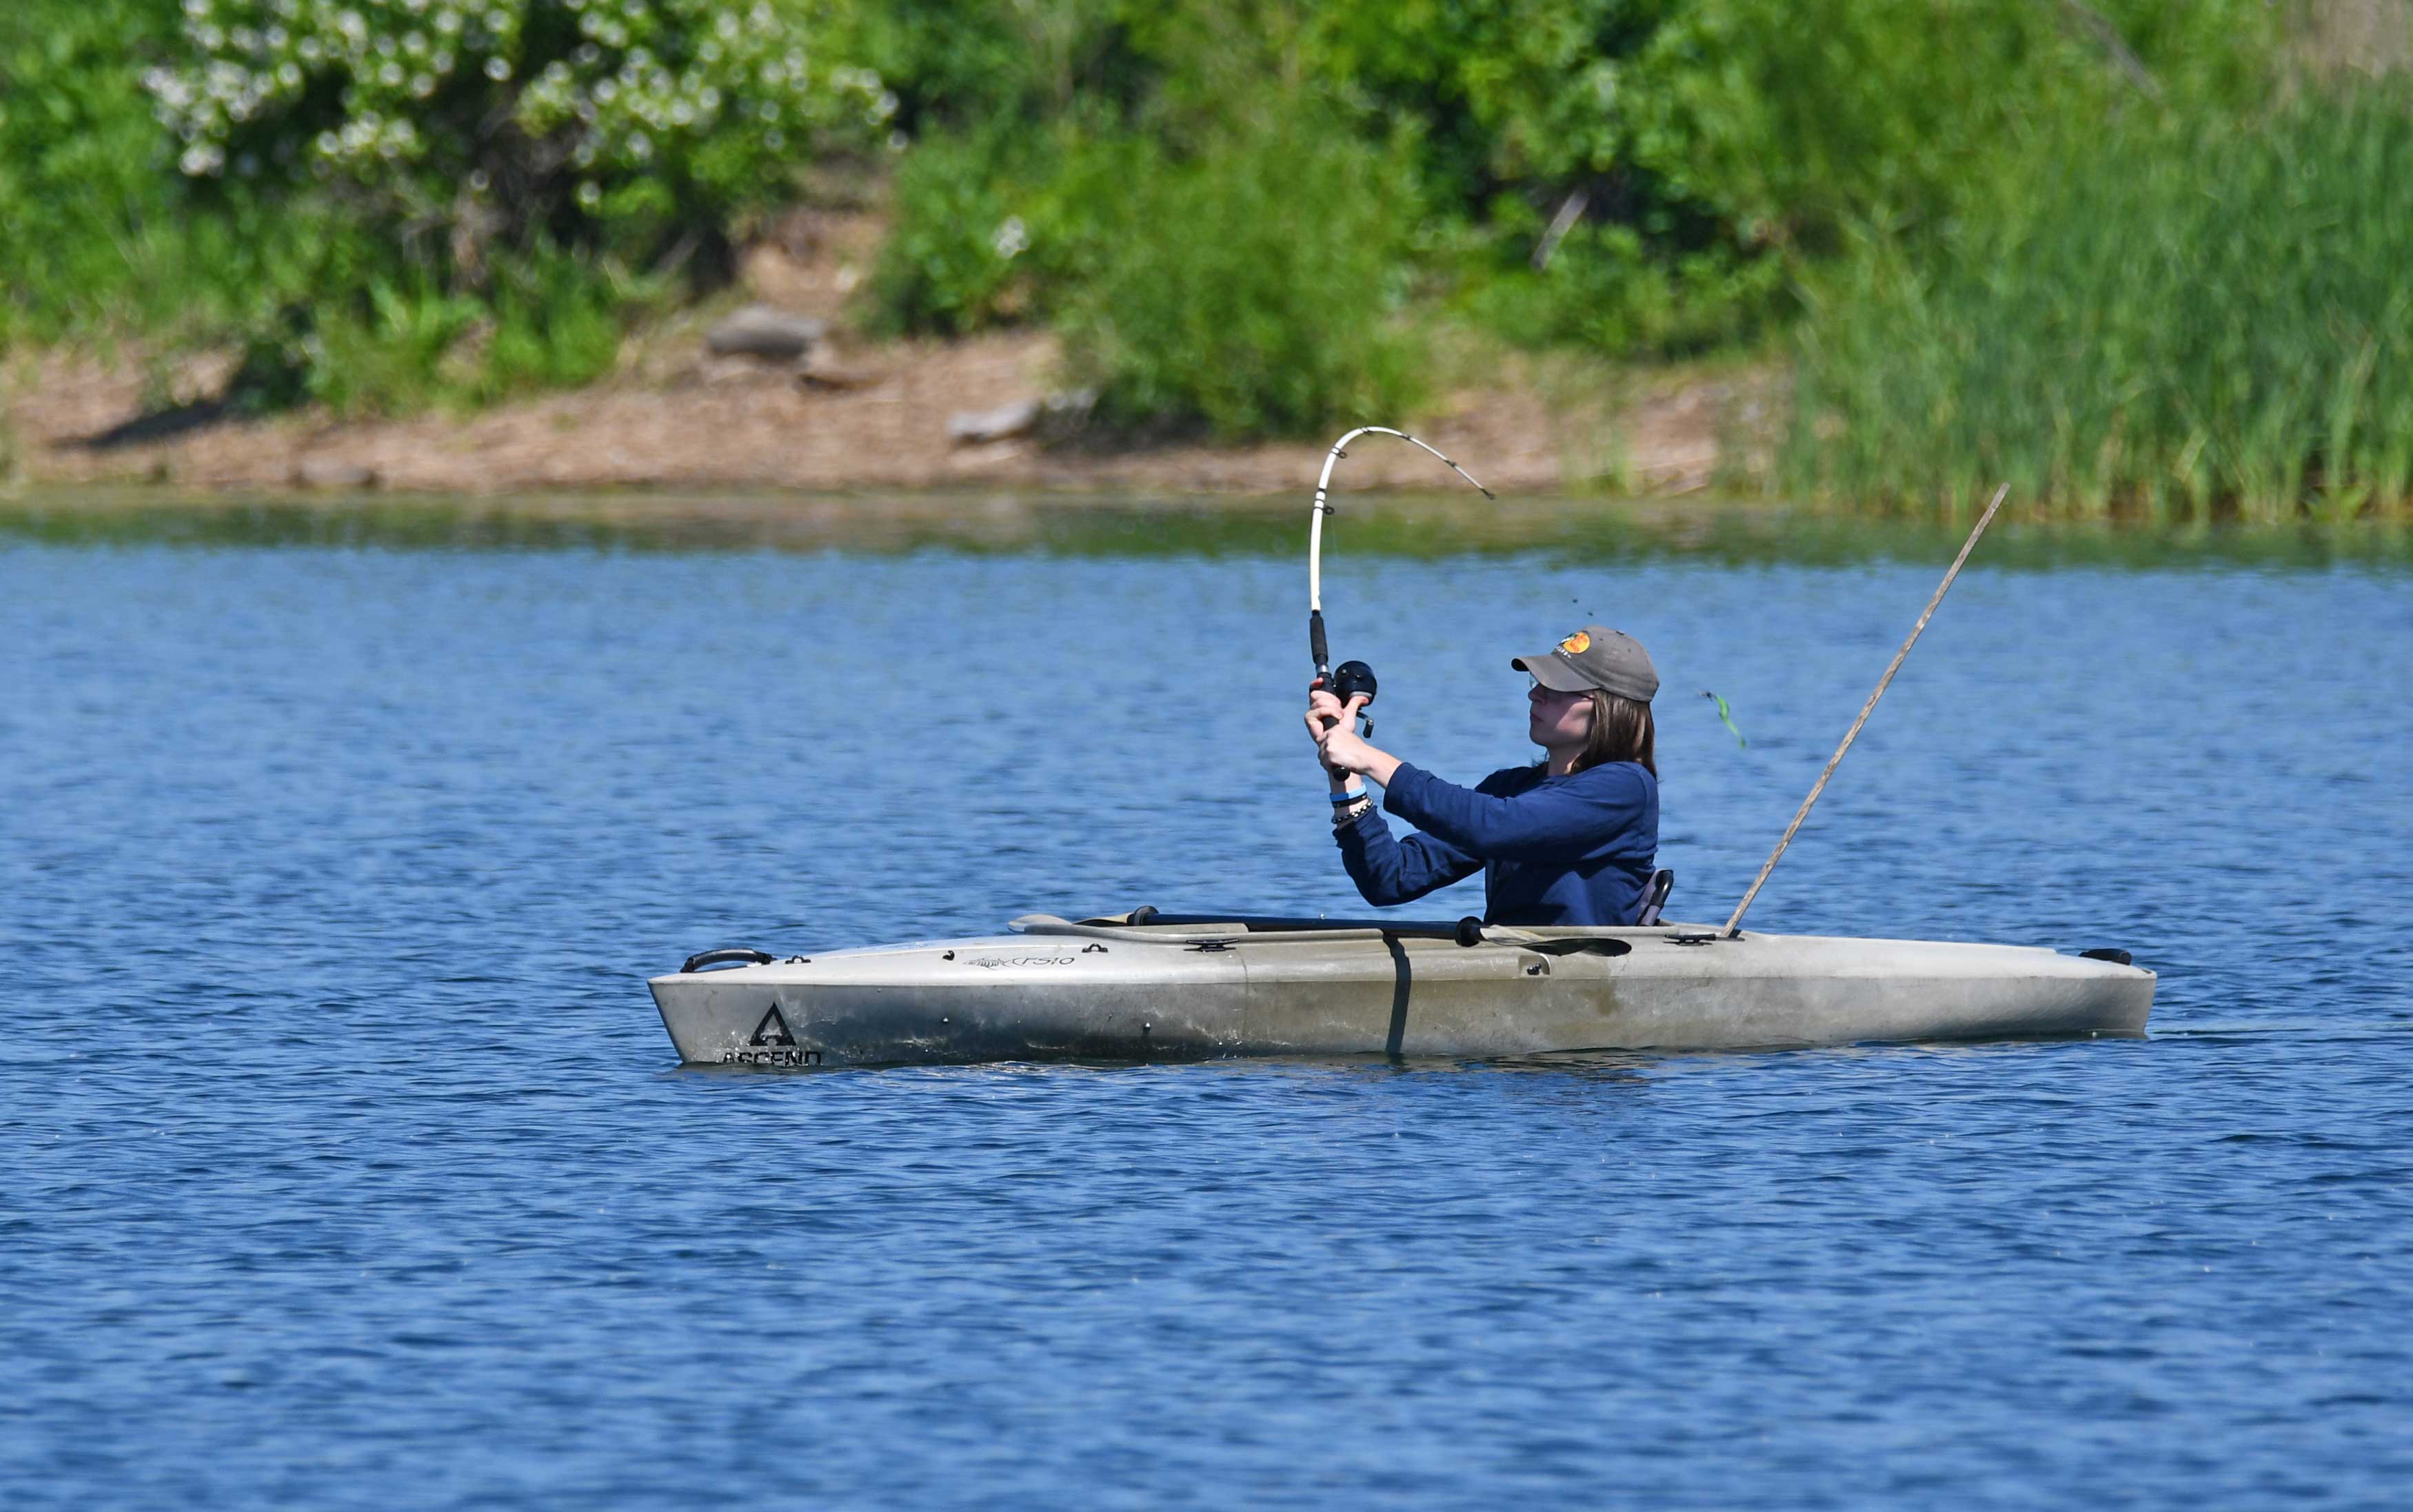 A person fishes from a kayak.